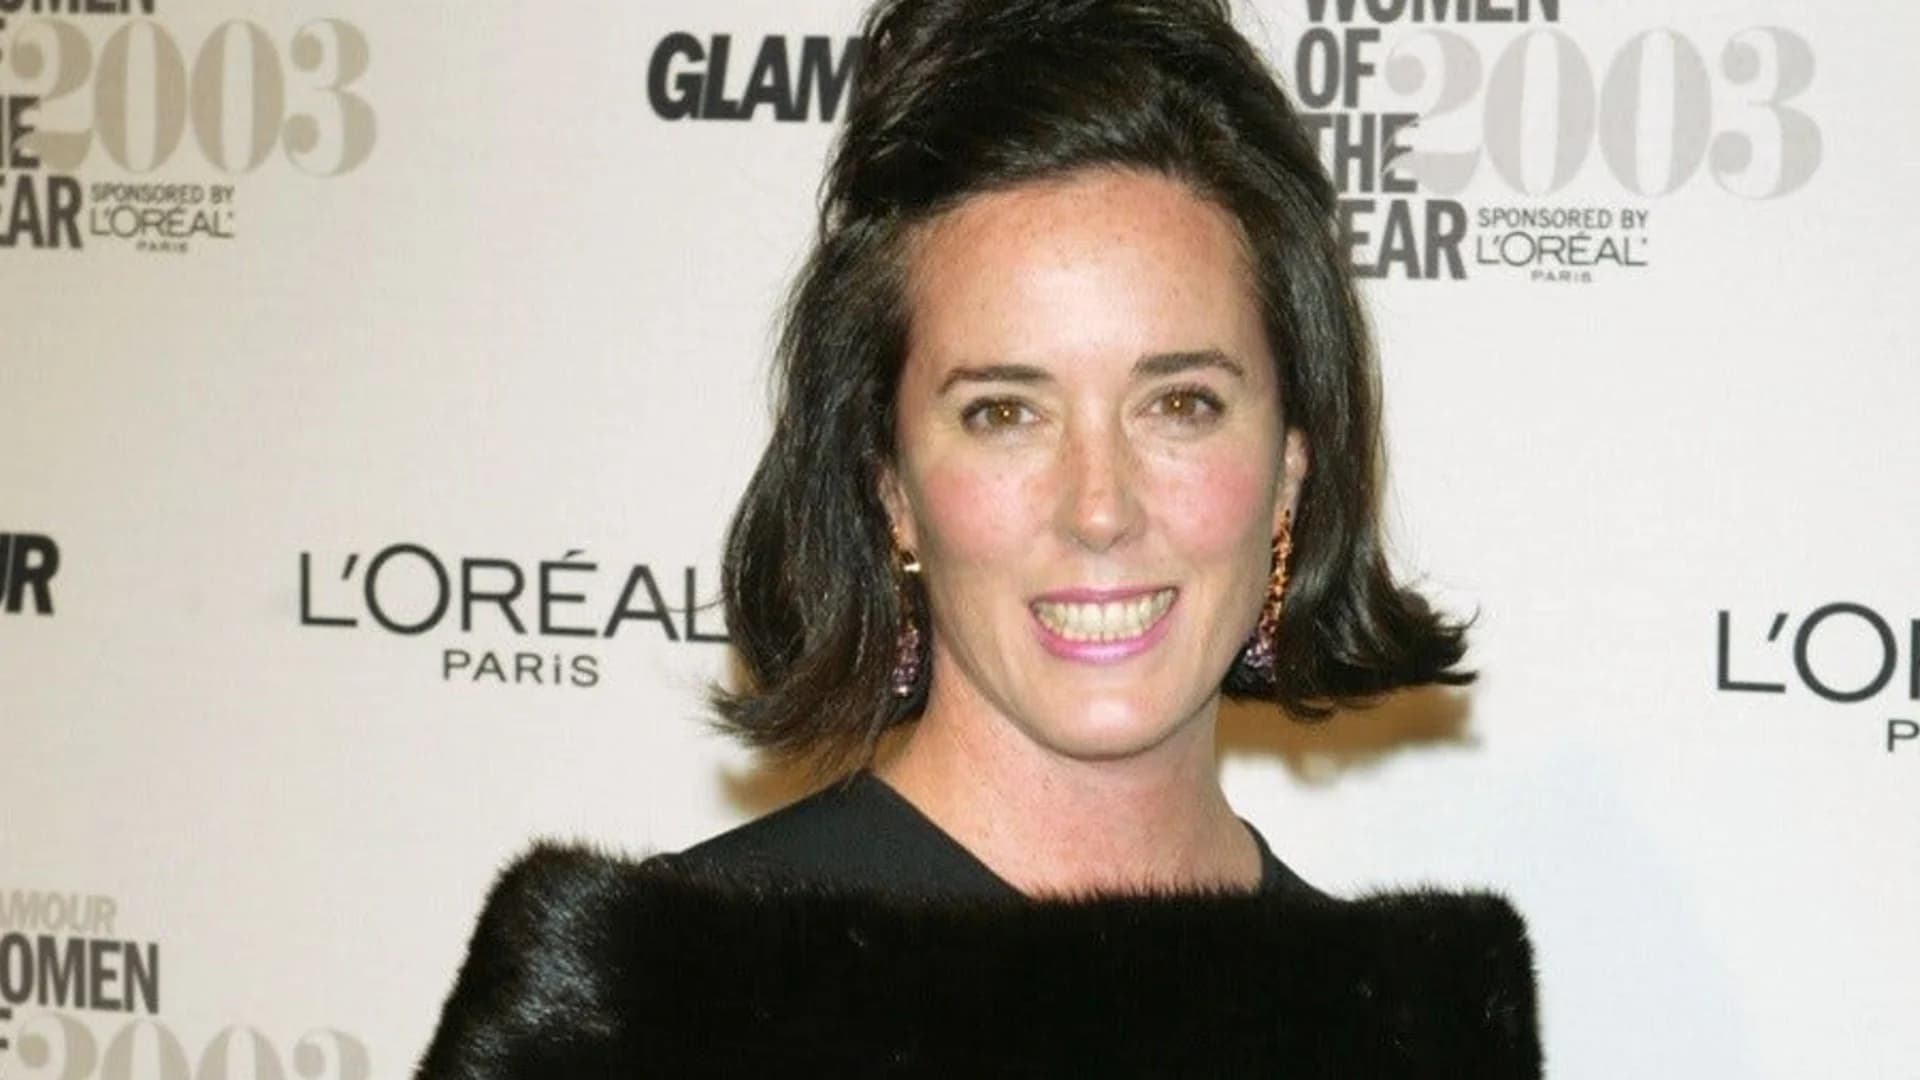 Celebrities, fashion insiders react to death of Kate Spade